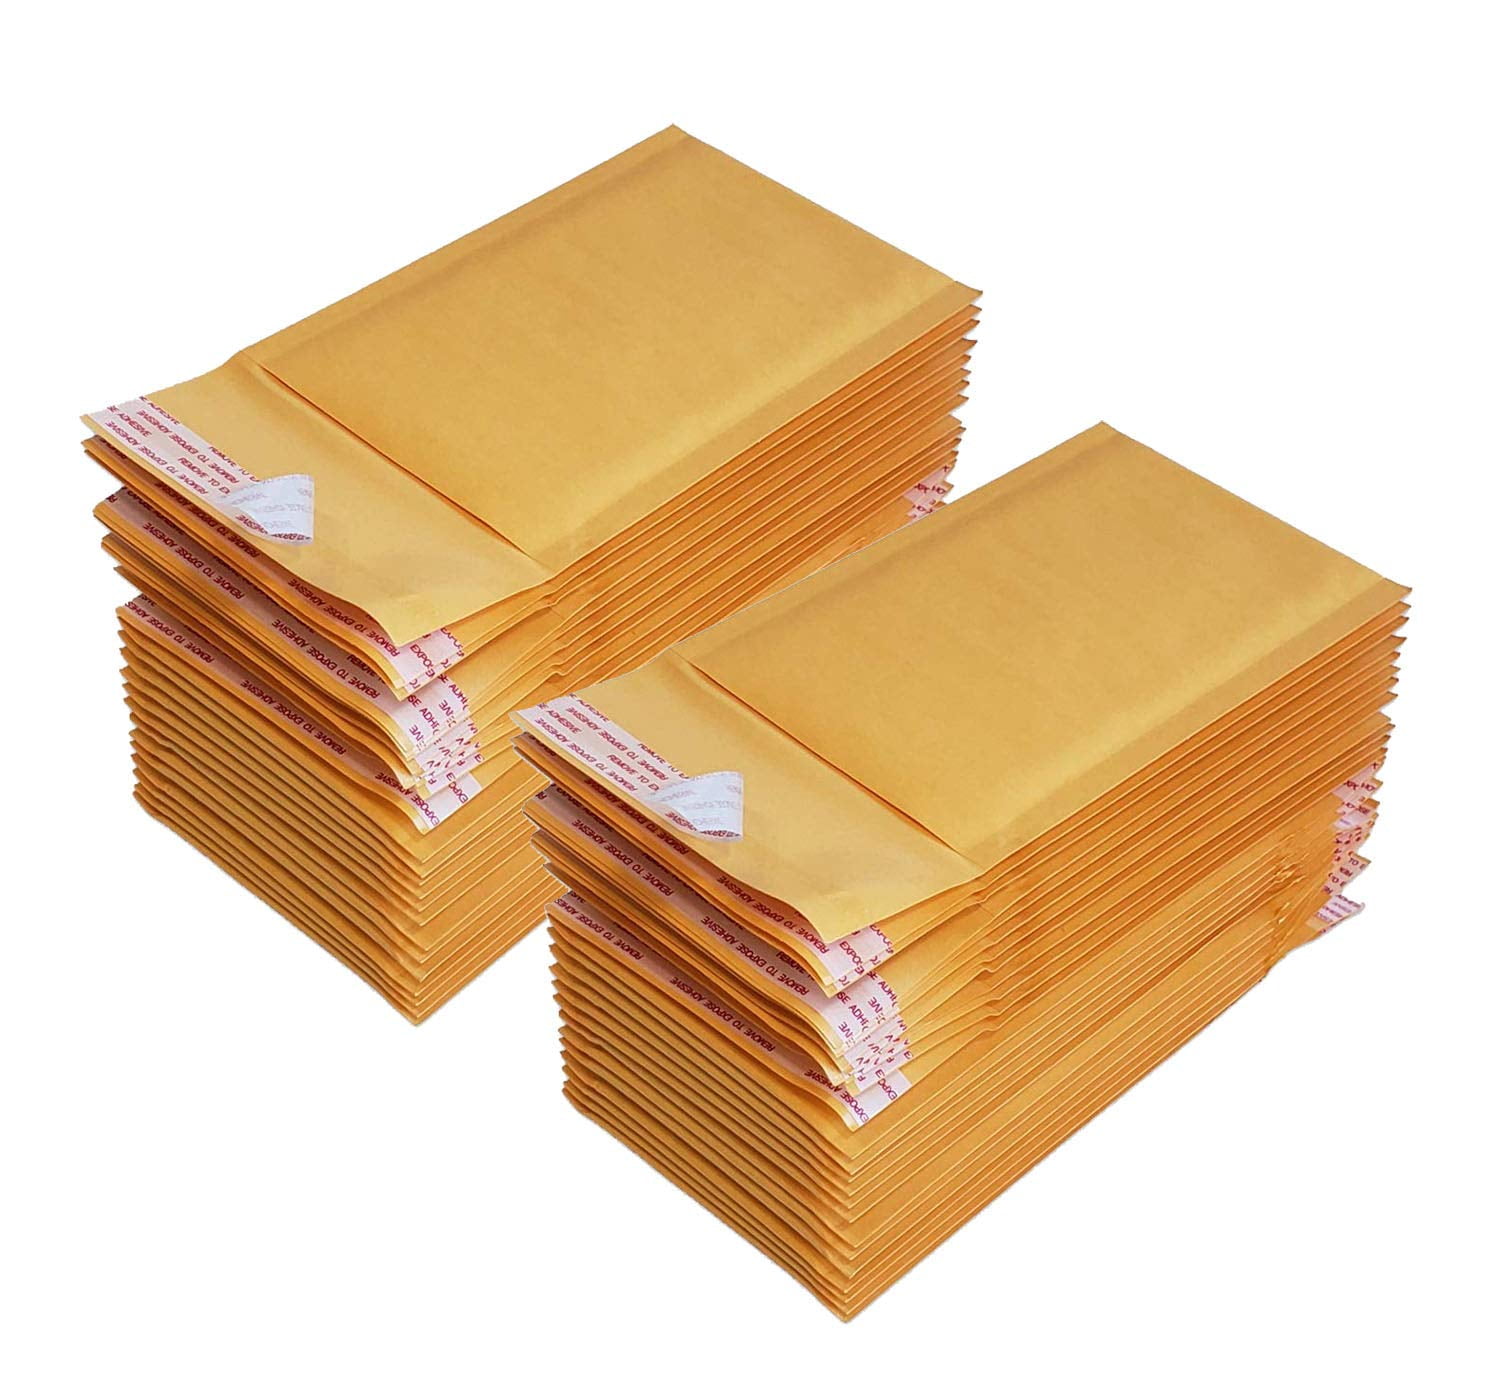 5 EcoSwift Size #6 12.5x19 Poly Bubble Mailers Padded Envelope Shipping Supply Bags 12.5 x 19 inches